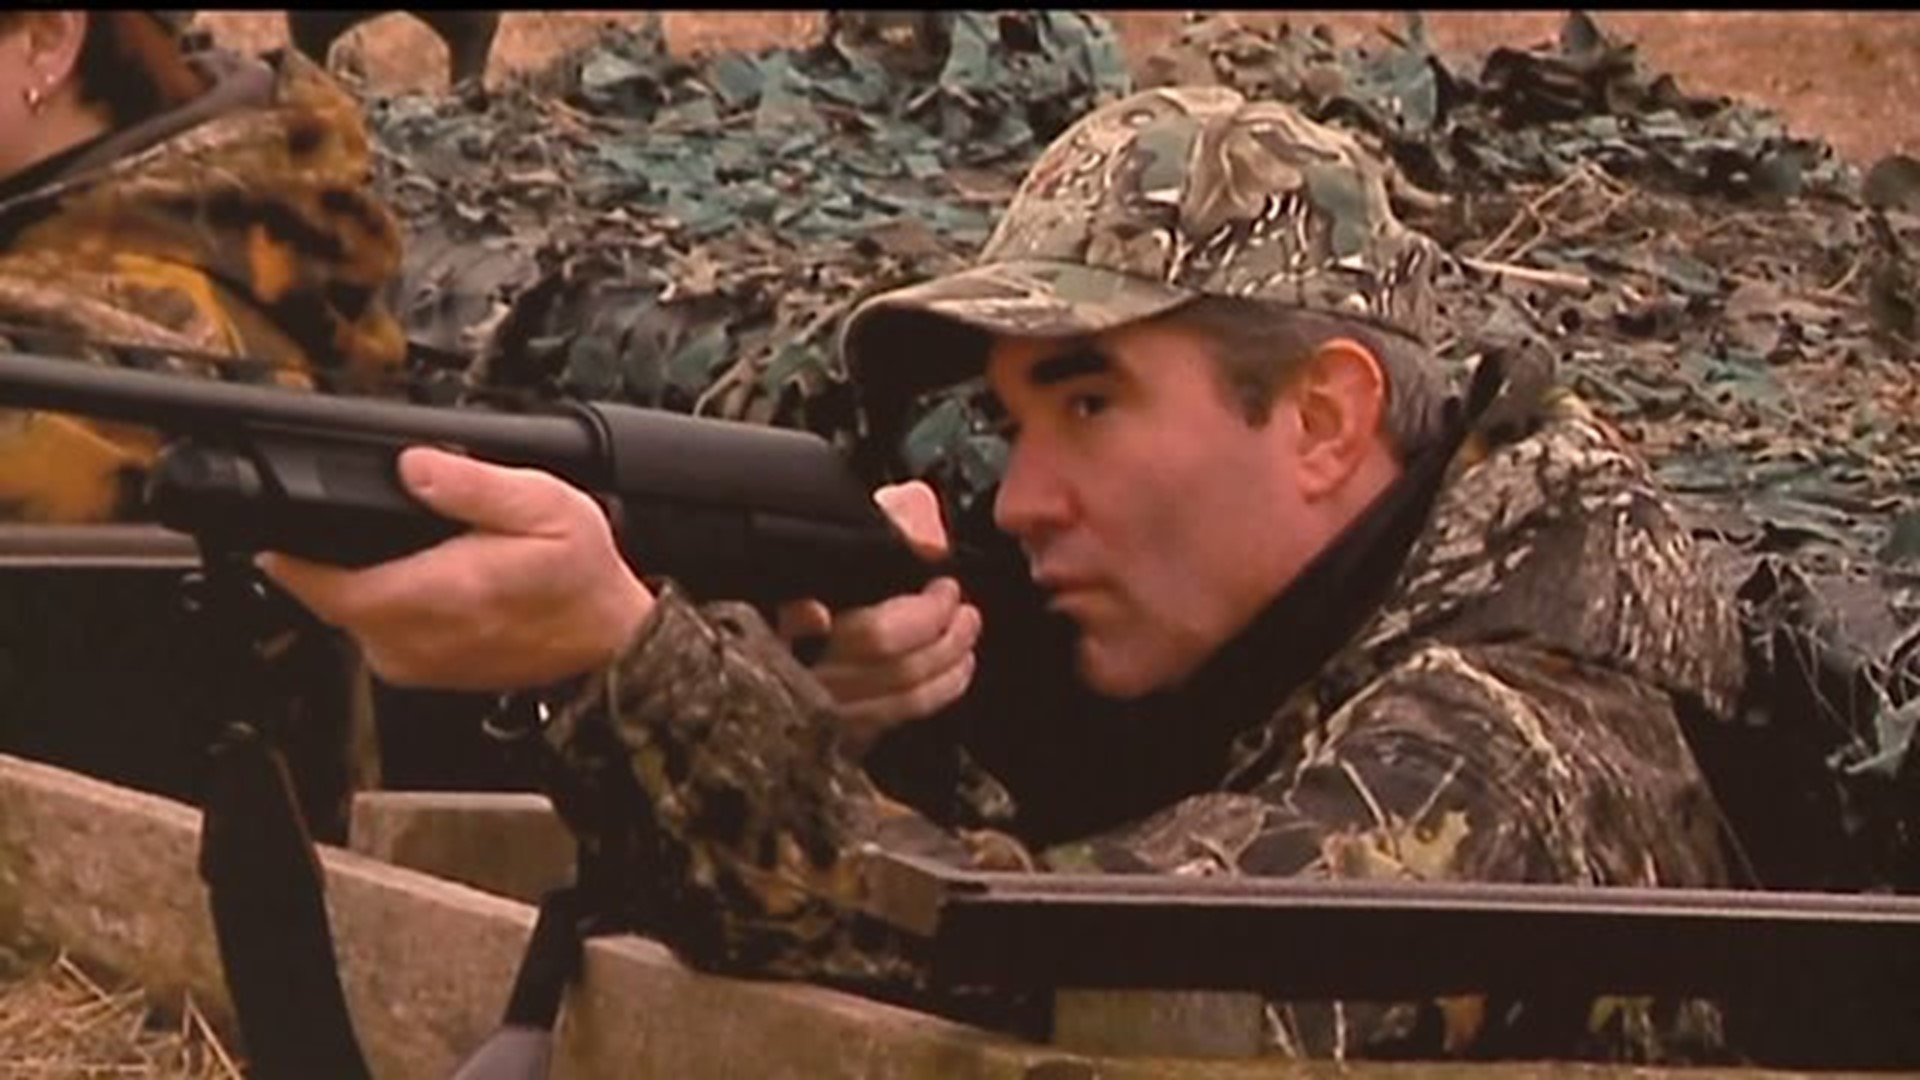 Prices of hunting licenses could rise in Pennsylvania